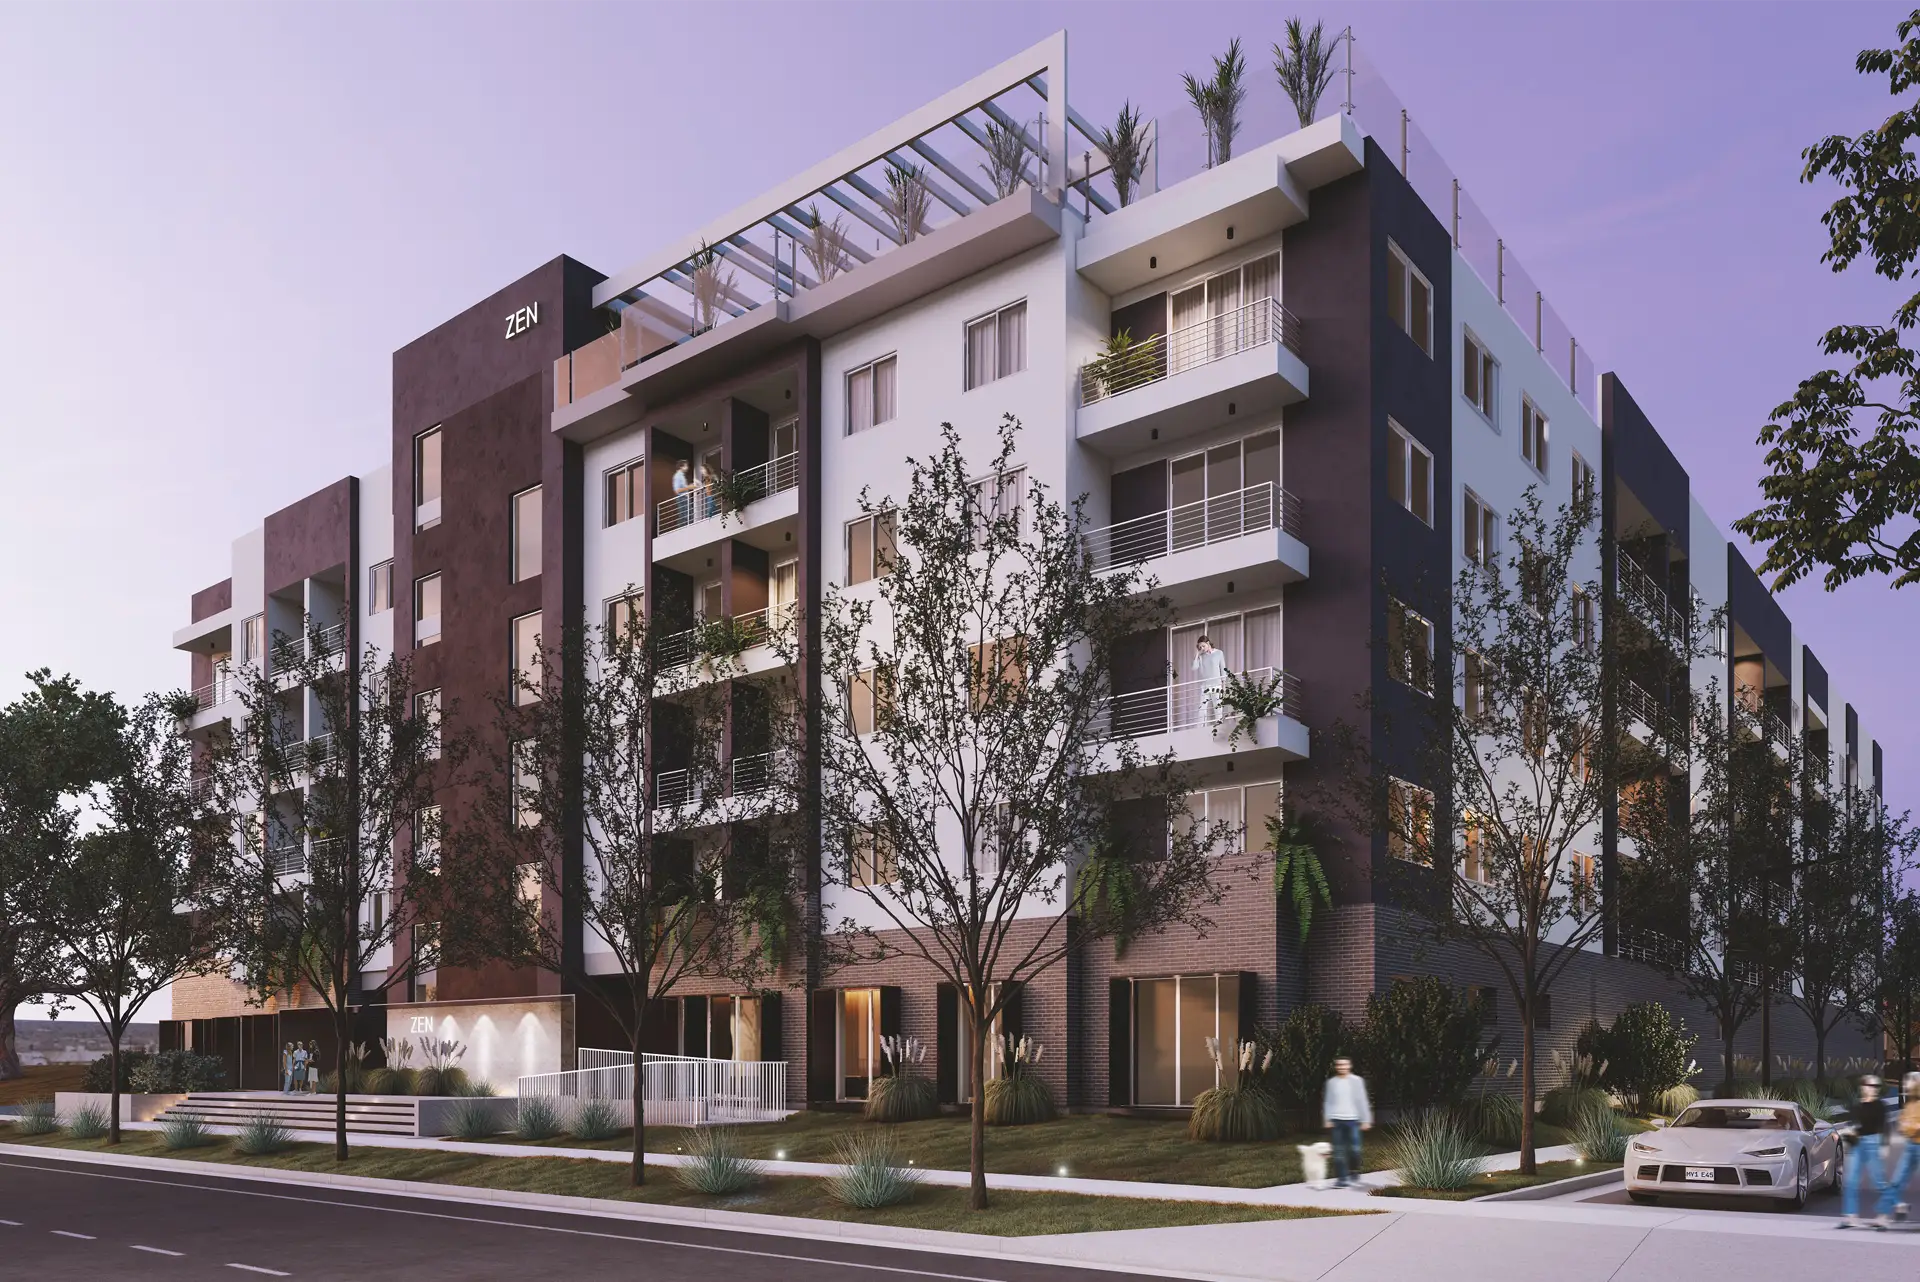 #1 of Top Single Family Home builders & Multi-family residential, mixed-Use & commercial real estate developers in Denver, Colorado - Weins Development Group.